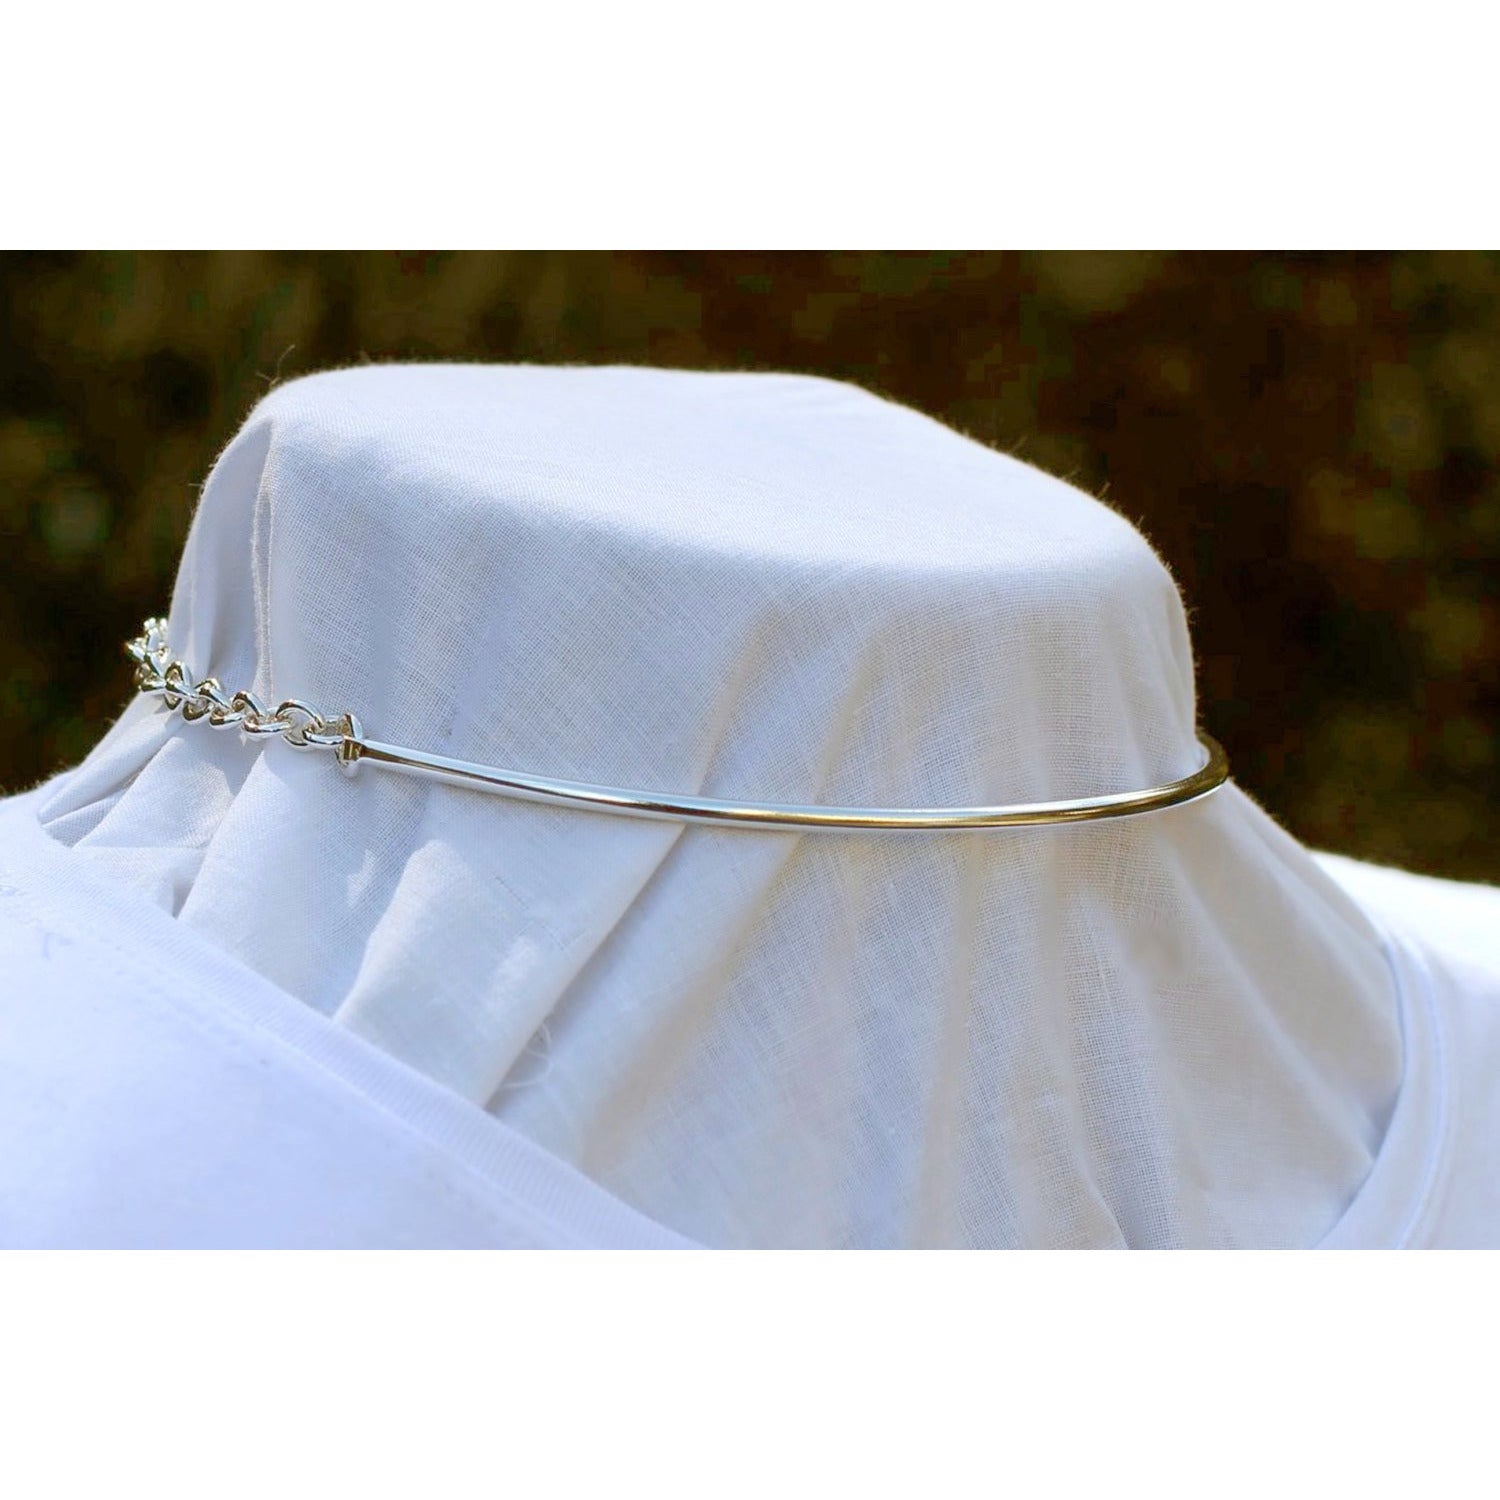 New Design, Discreet Day Collar, 3mm Sterling Silver (8g), Chain Back Section, Handmade, BDSM Collar